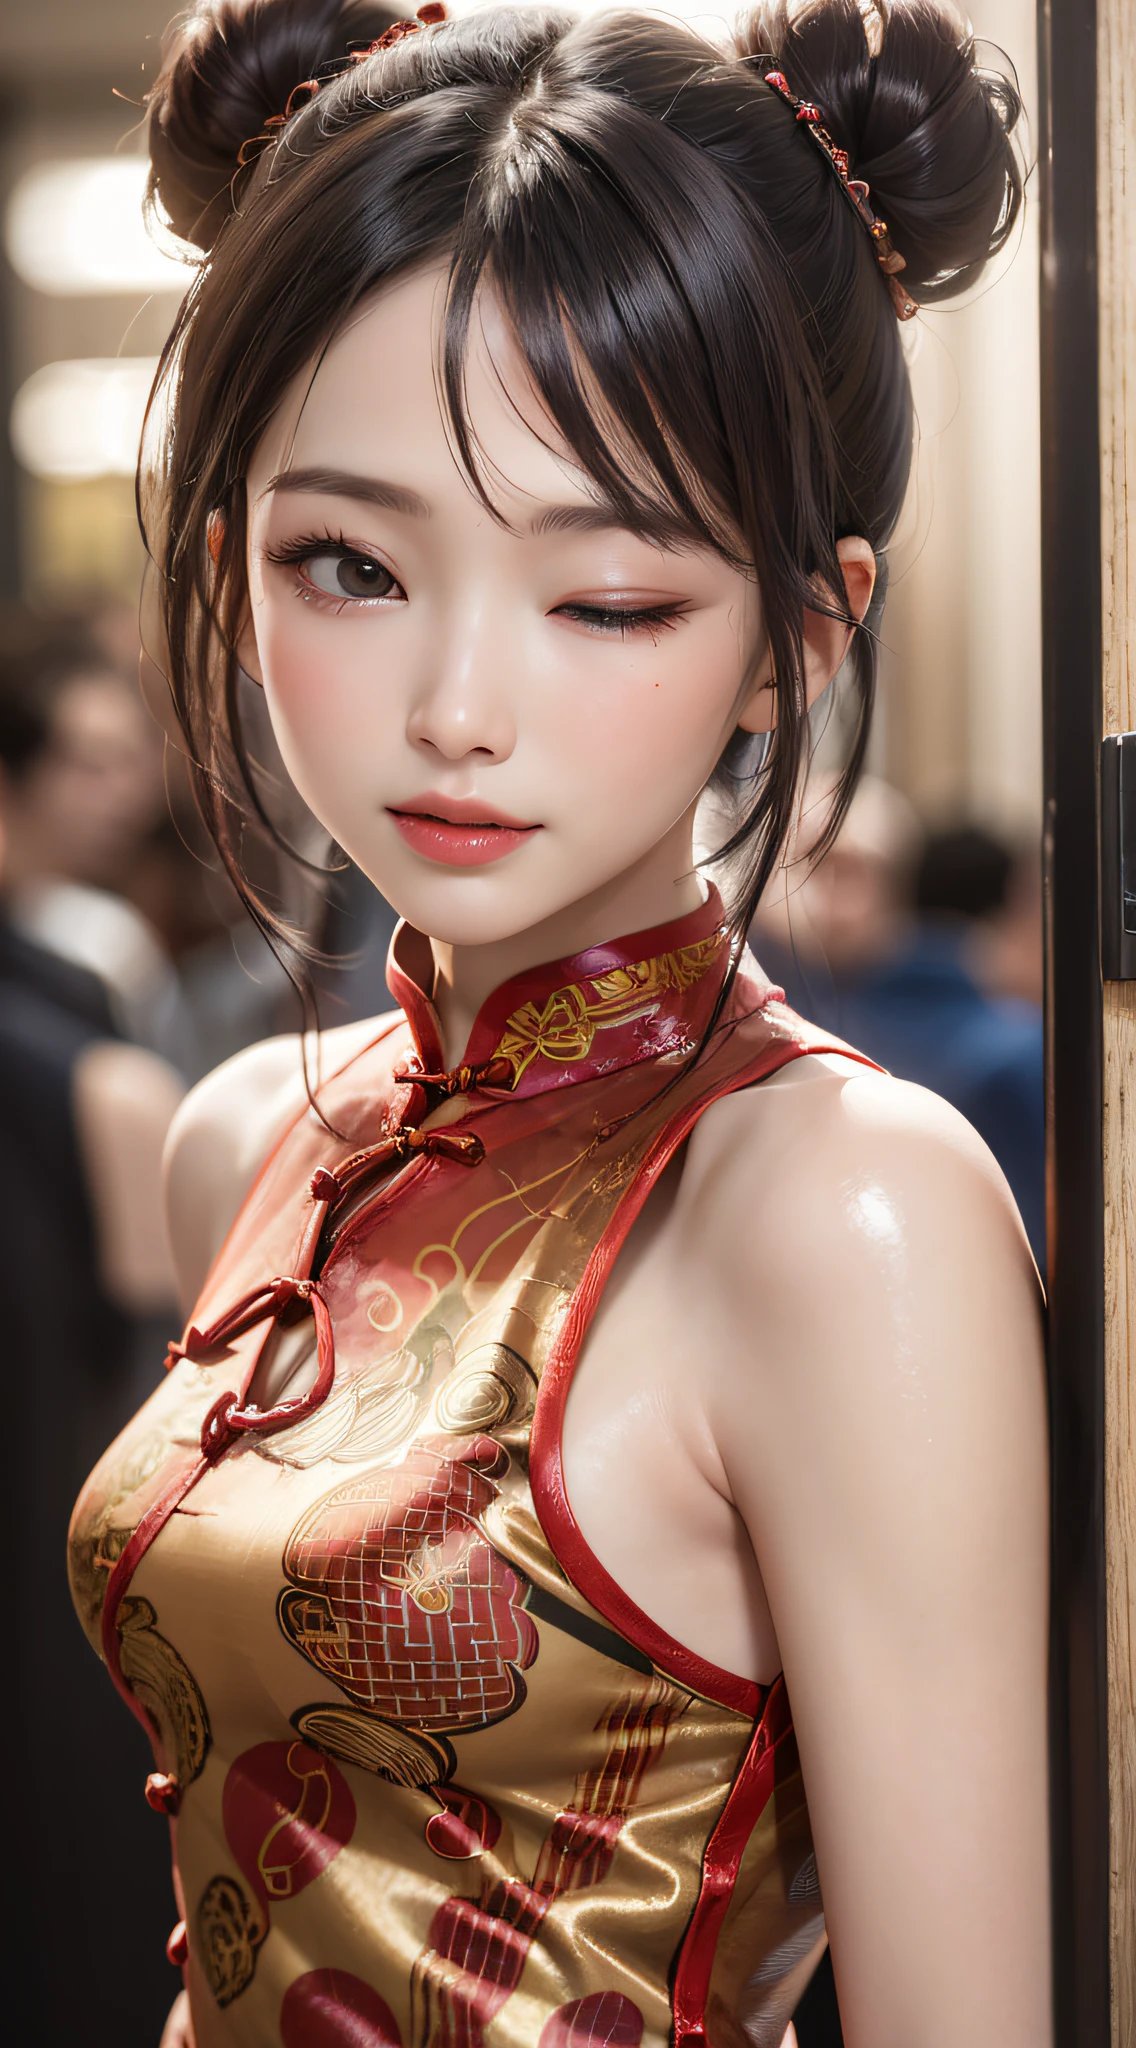 neon street at night, 1girl:1.3, 25 years old, (light pink, tongue):1.5, slim body, tight buttocks, perfect body, (medium breasts), thin thighs, (one eye closed, wink):1.3, BREAK, woman wearing(National style cheongsam, glossy:1.5), show cleavage, dark-brown hair, hair bun, BREAK, (Natural Skin Texture, Detailed shiny-skin, black eyes, shiny-lipgloss, Smile happily, perfect face, cute face, thin lips, small face, upper-body shot, (8K, high resolution, Best Quality, masterpiece:1.2), RAW, portrait, high resolution, top-quality, Hyper-Realism, (Photorealistic:1.3), intricate detailed, ultra sharpness, depth of fields, facing front, face focus up